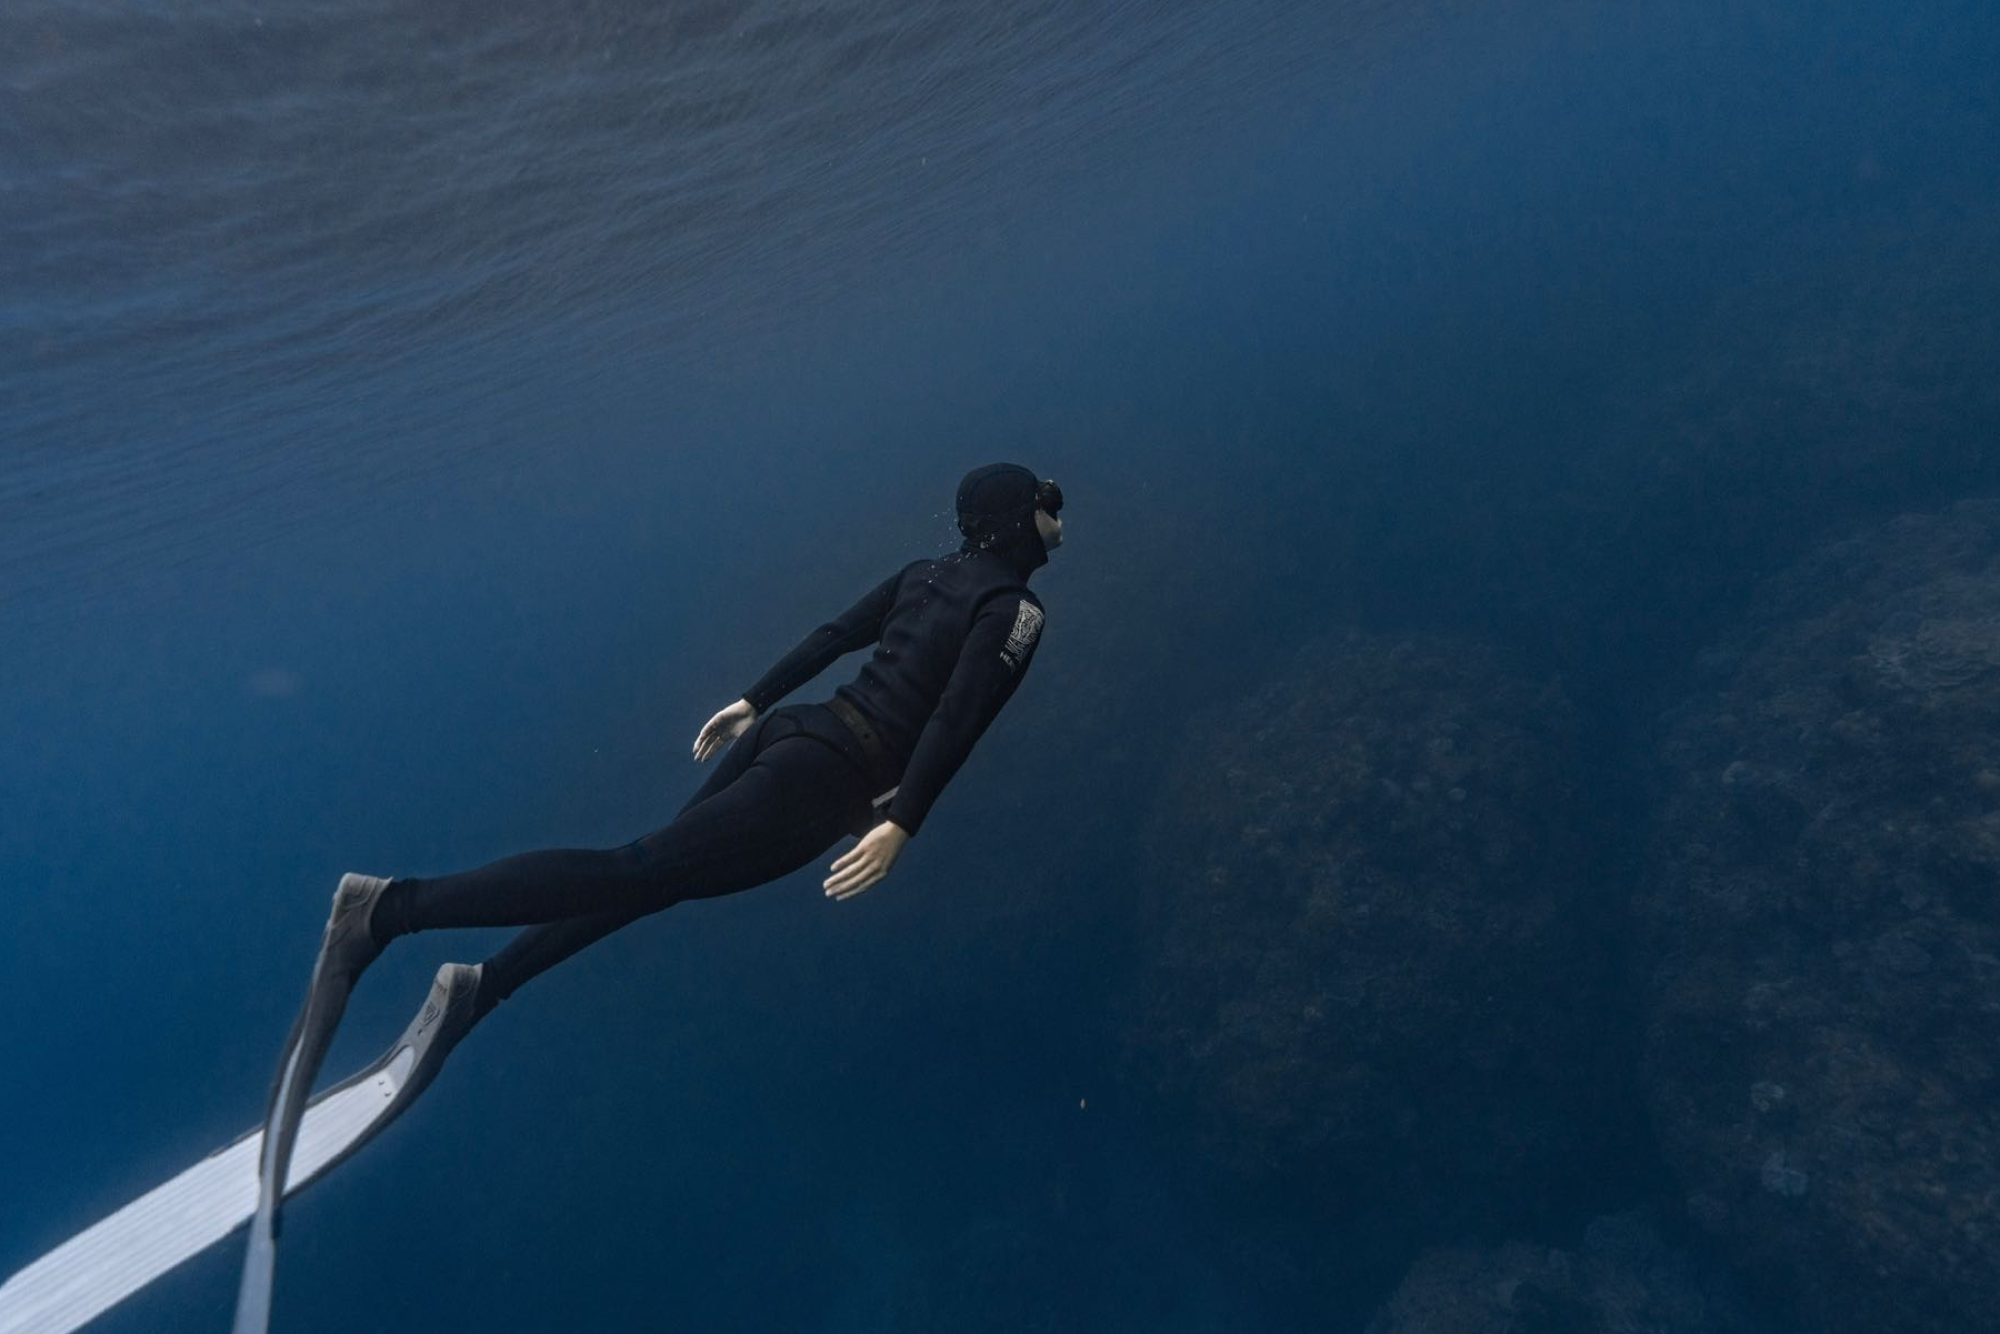 Freediving: Underwater swimming without protective and breathing equipment, Extreme water sport. 2000x1340 HD Wallpaper.